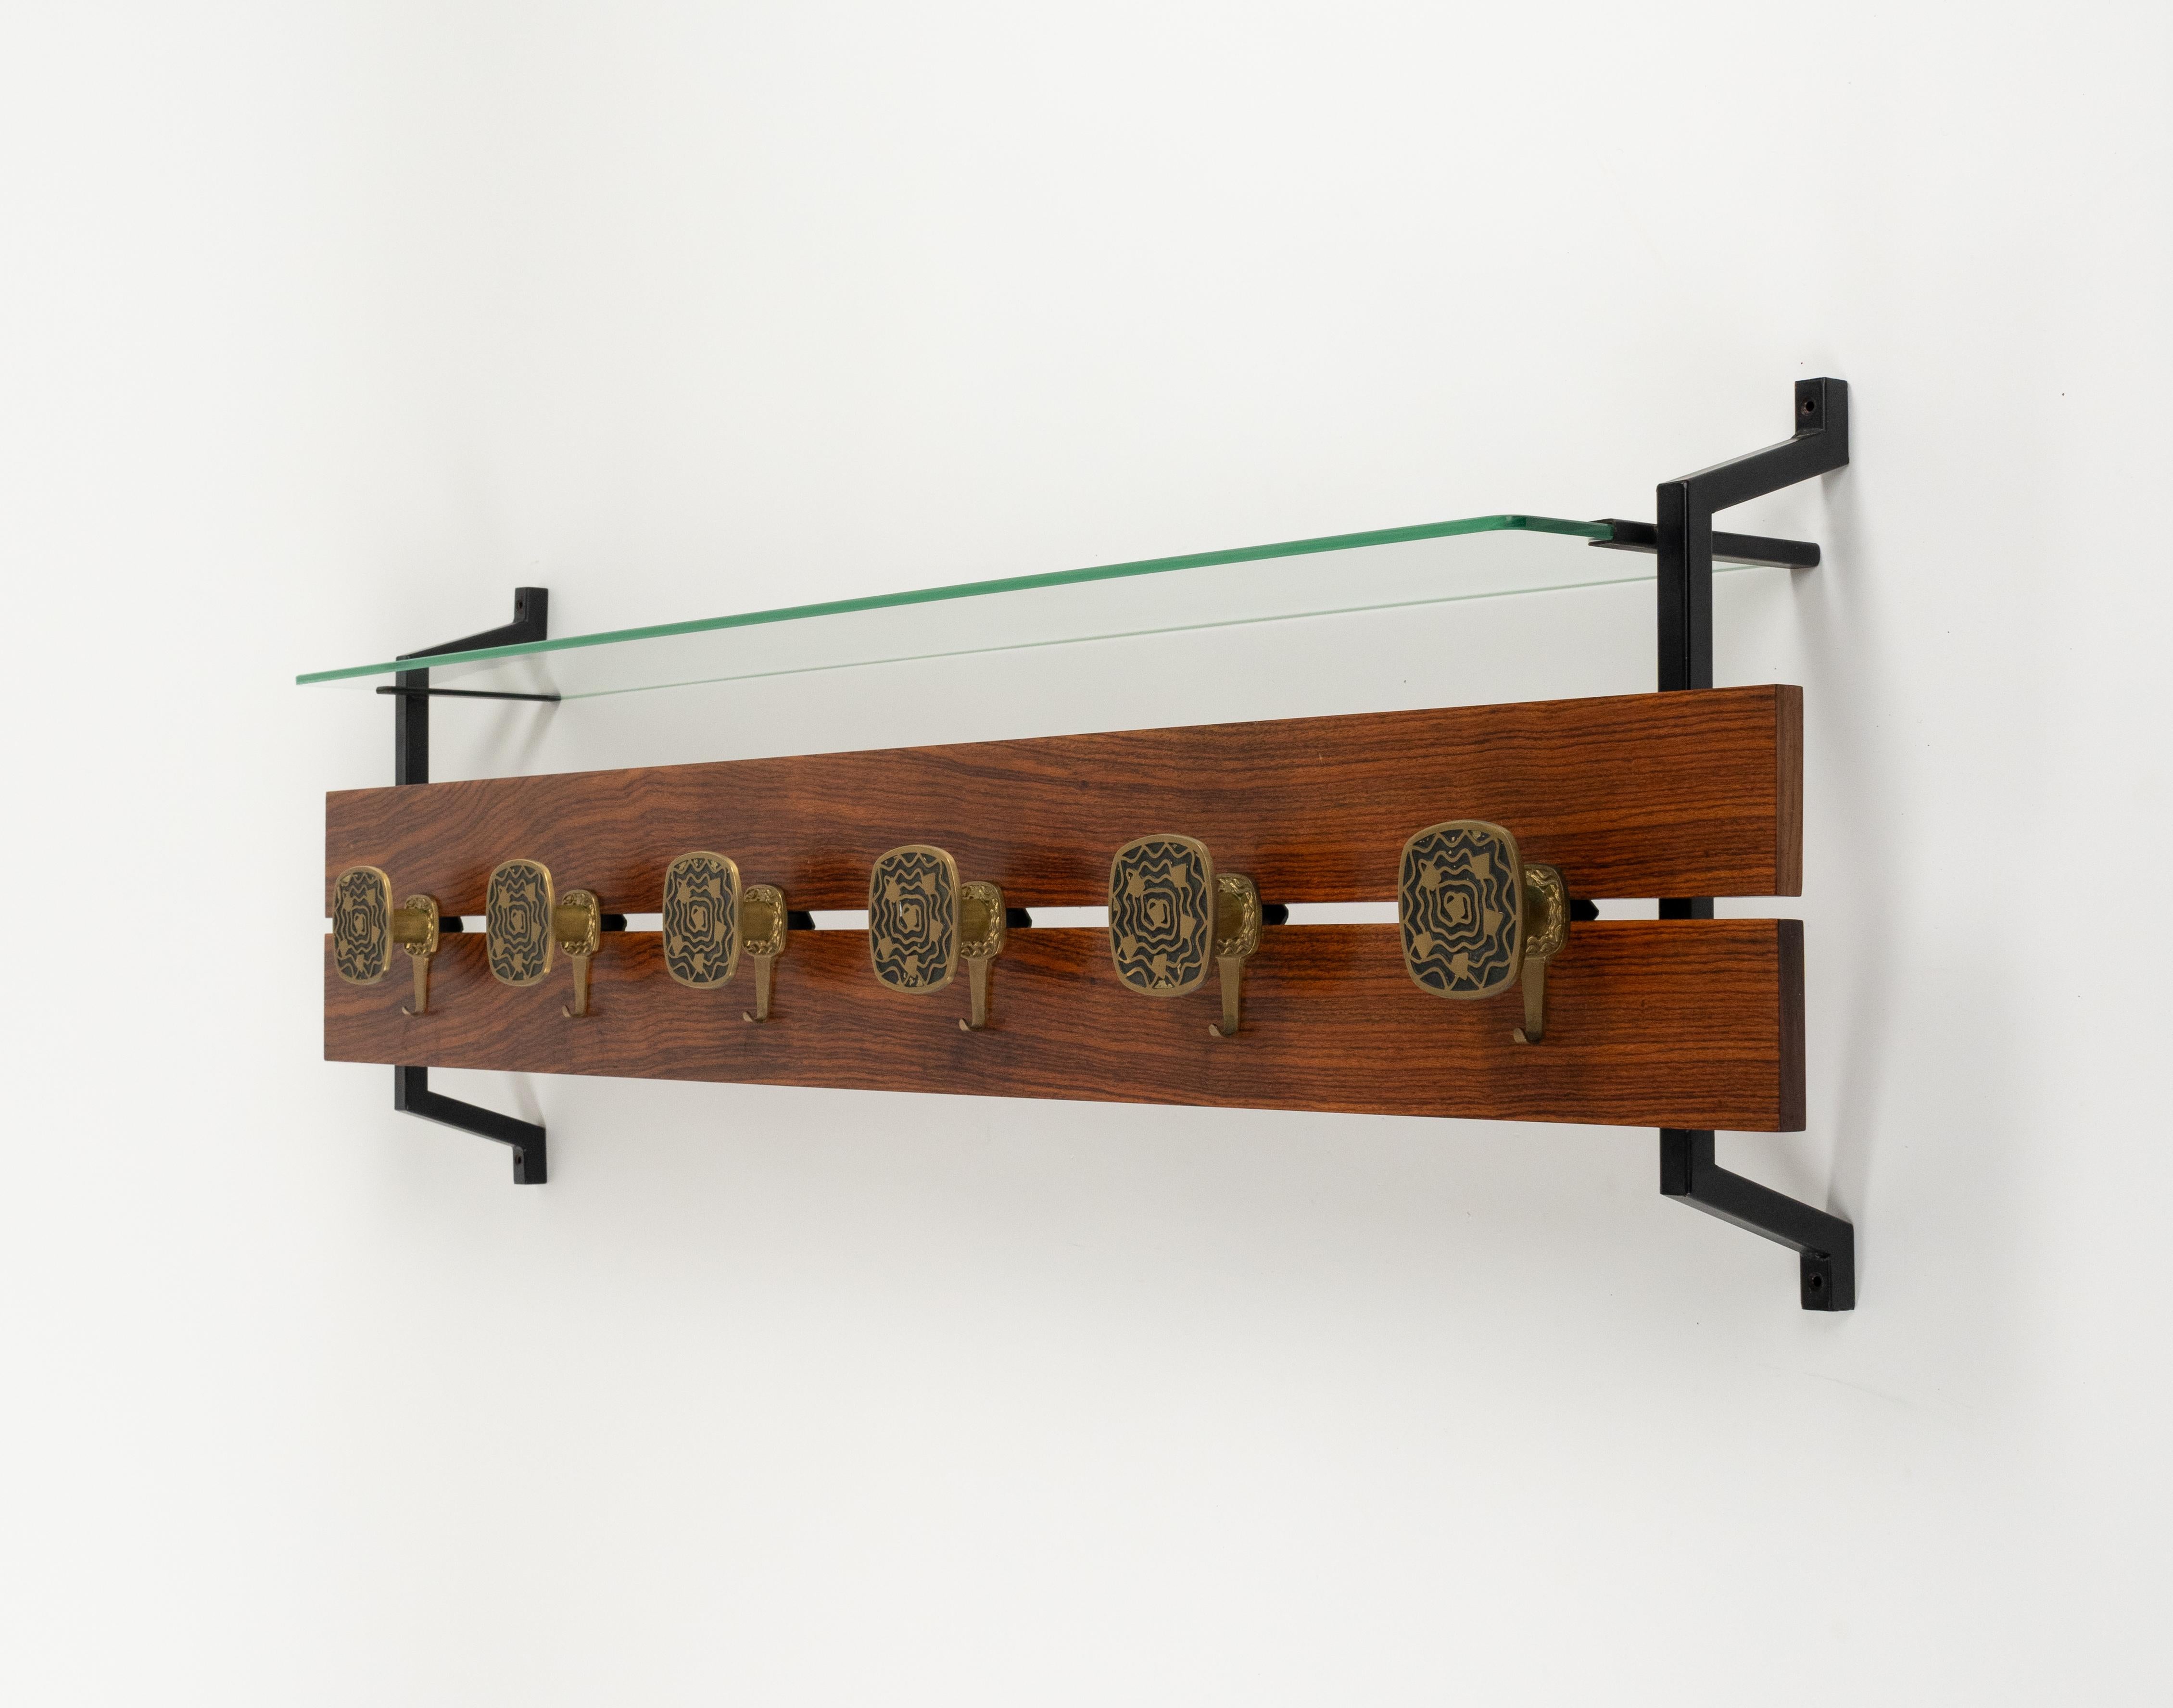 Midcentury Wood, Glass and Brass Coat Rack Herta Baller Style, Italy 1970s For Sale 1